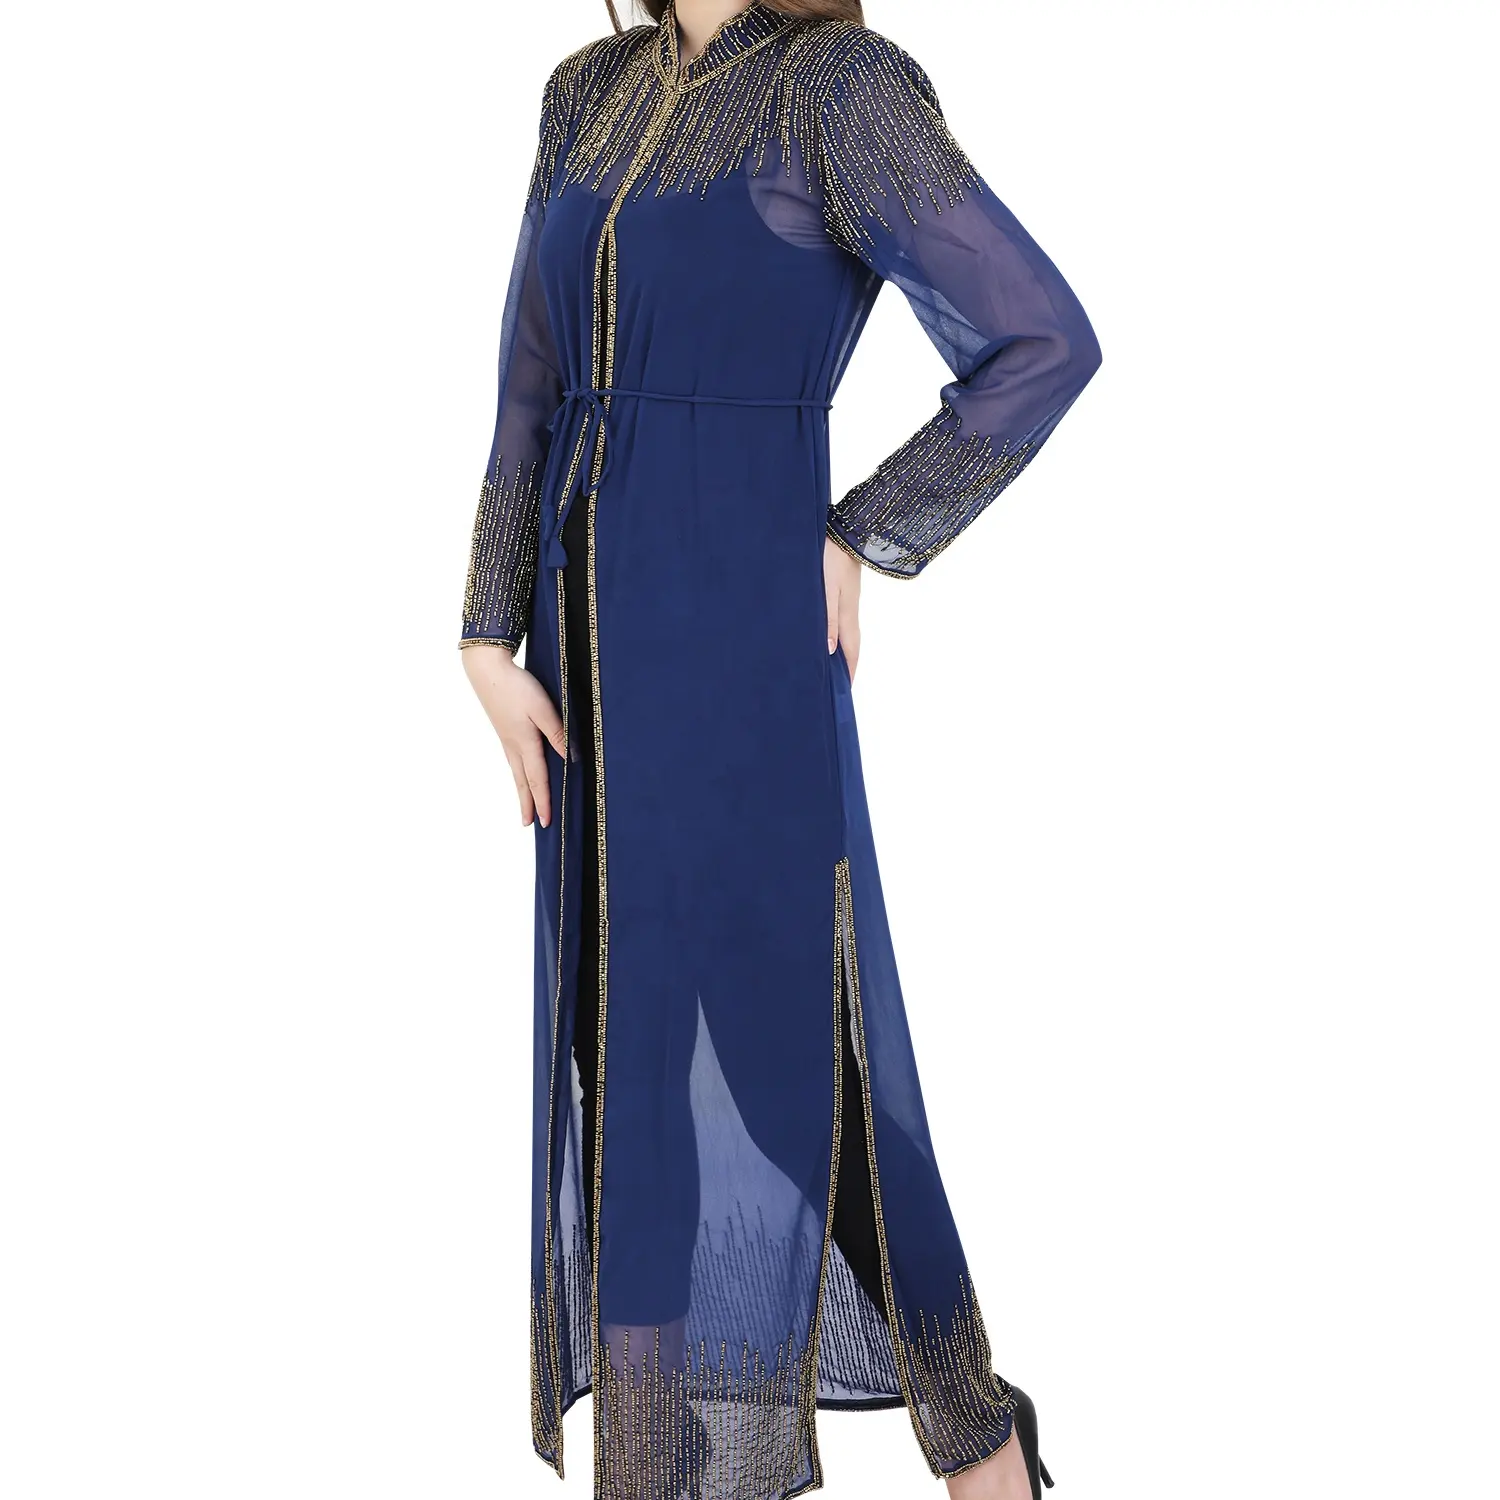 Kaftan Abaya Long Sleeve Long Maxi Dress Vintage good quality Georgette fabric front open long coat for lady women's clothing